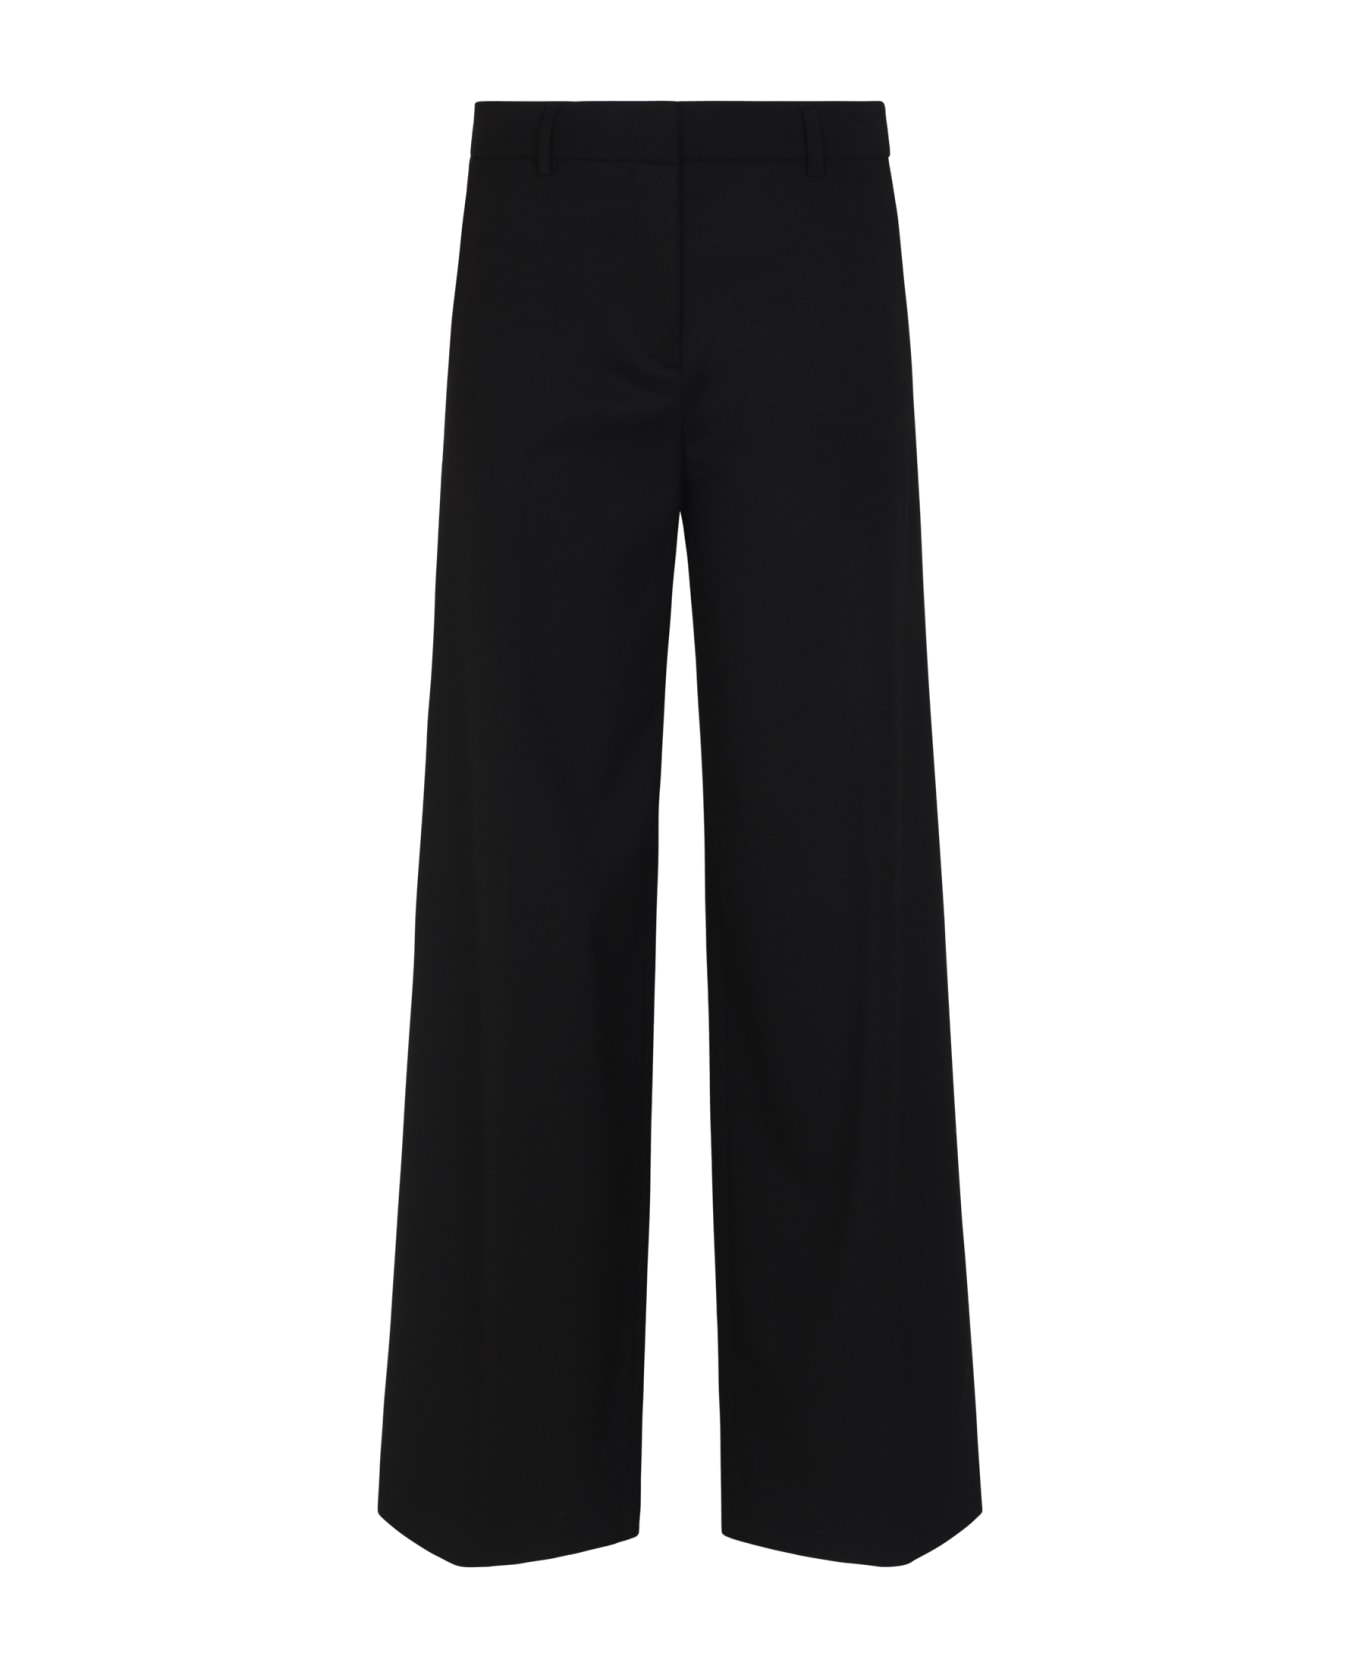 QL2 Straight Concealed Trousers - Black